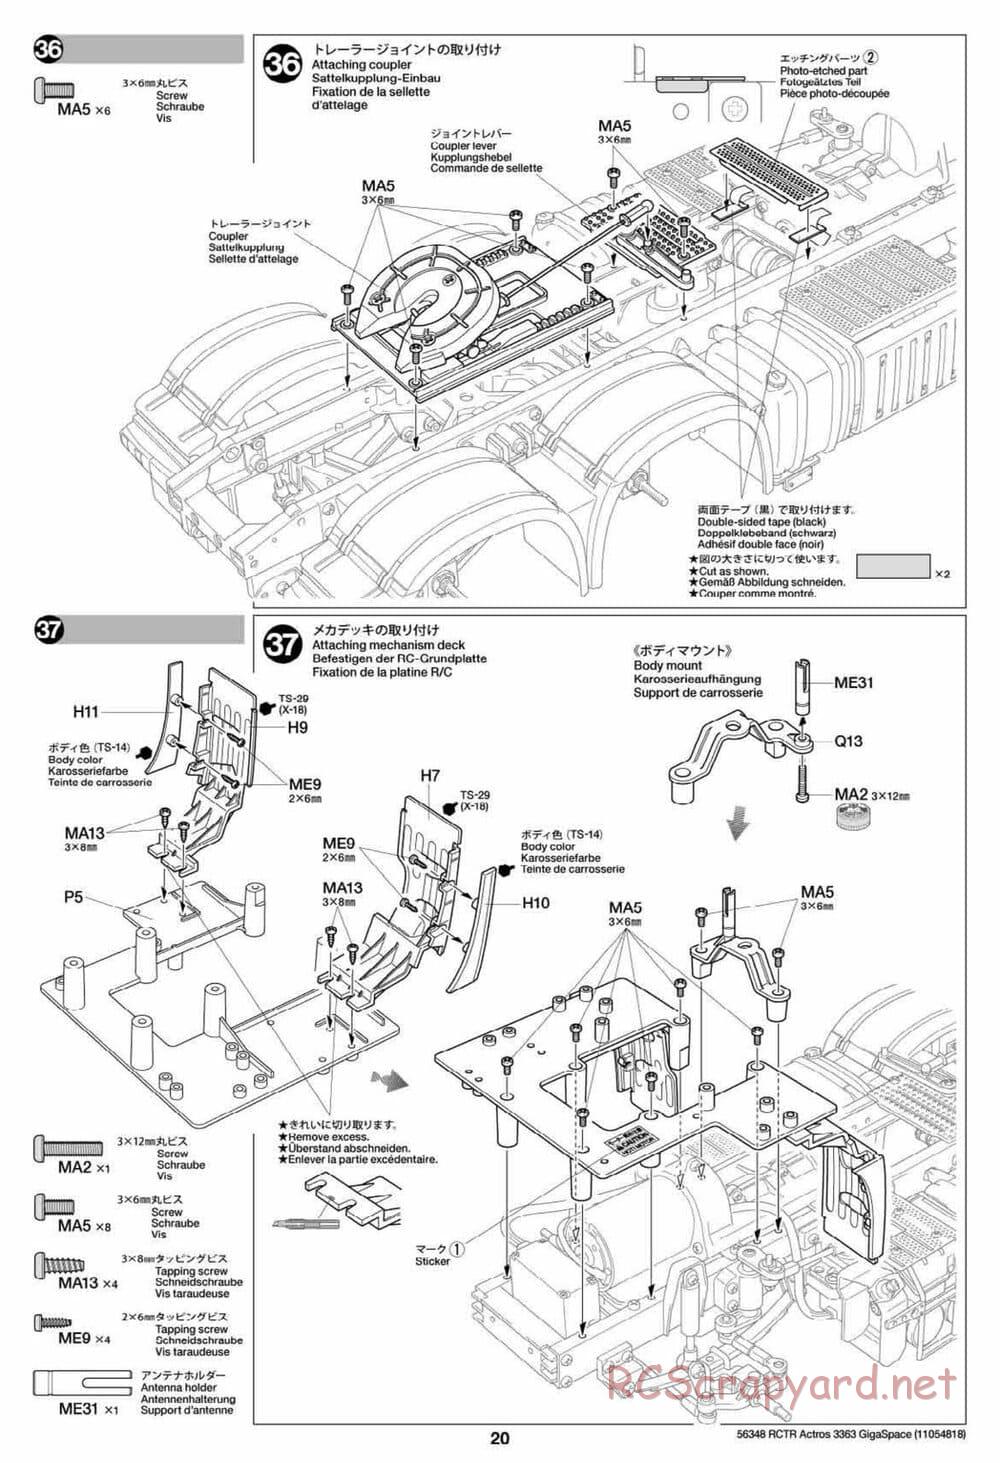 Tamiya - Mercedes-Benz Actros 3363 6x4 GigaSpace Tractor Truck Chassis - Manual - Page 20